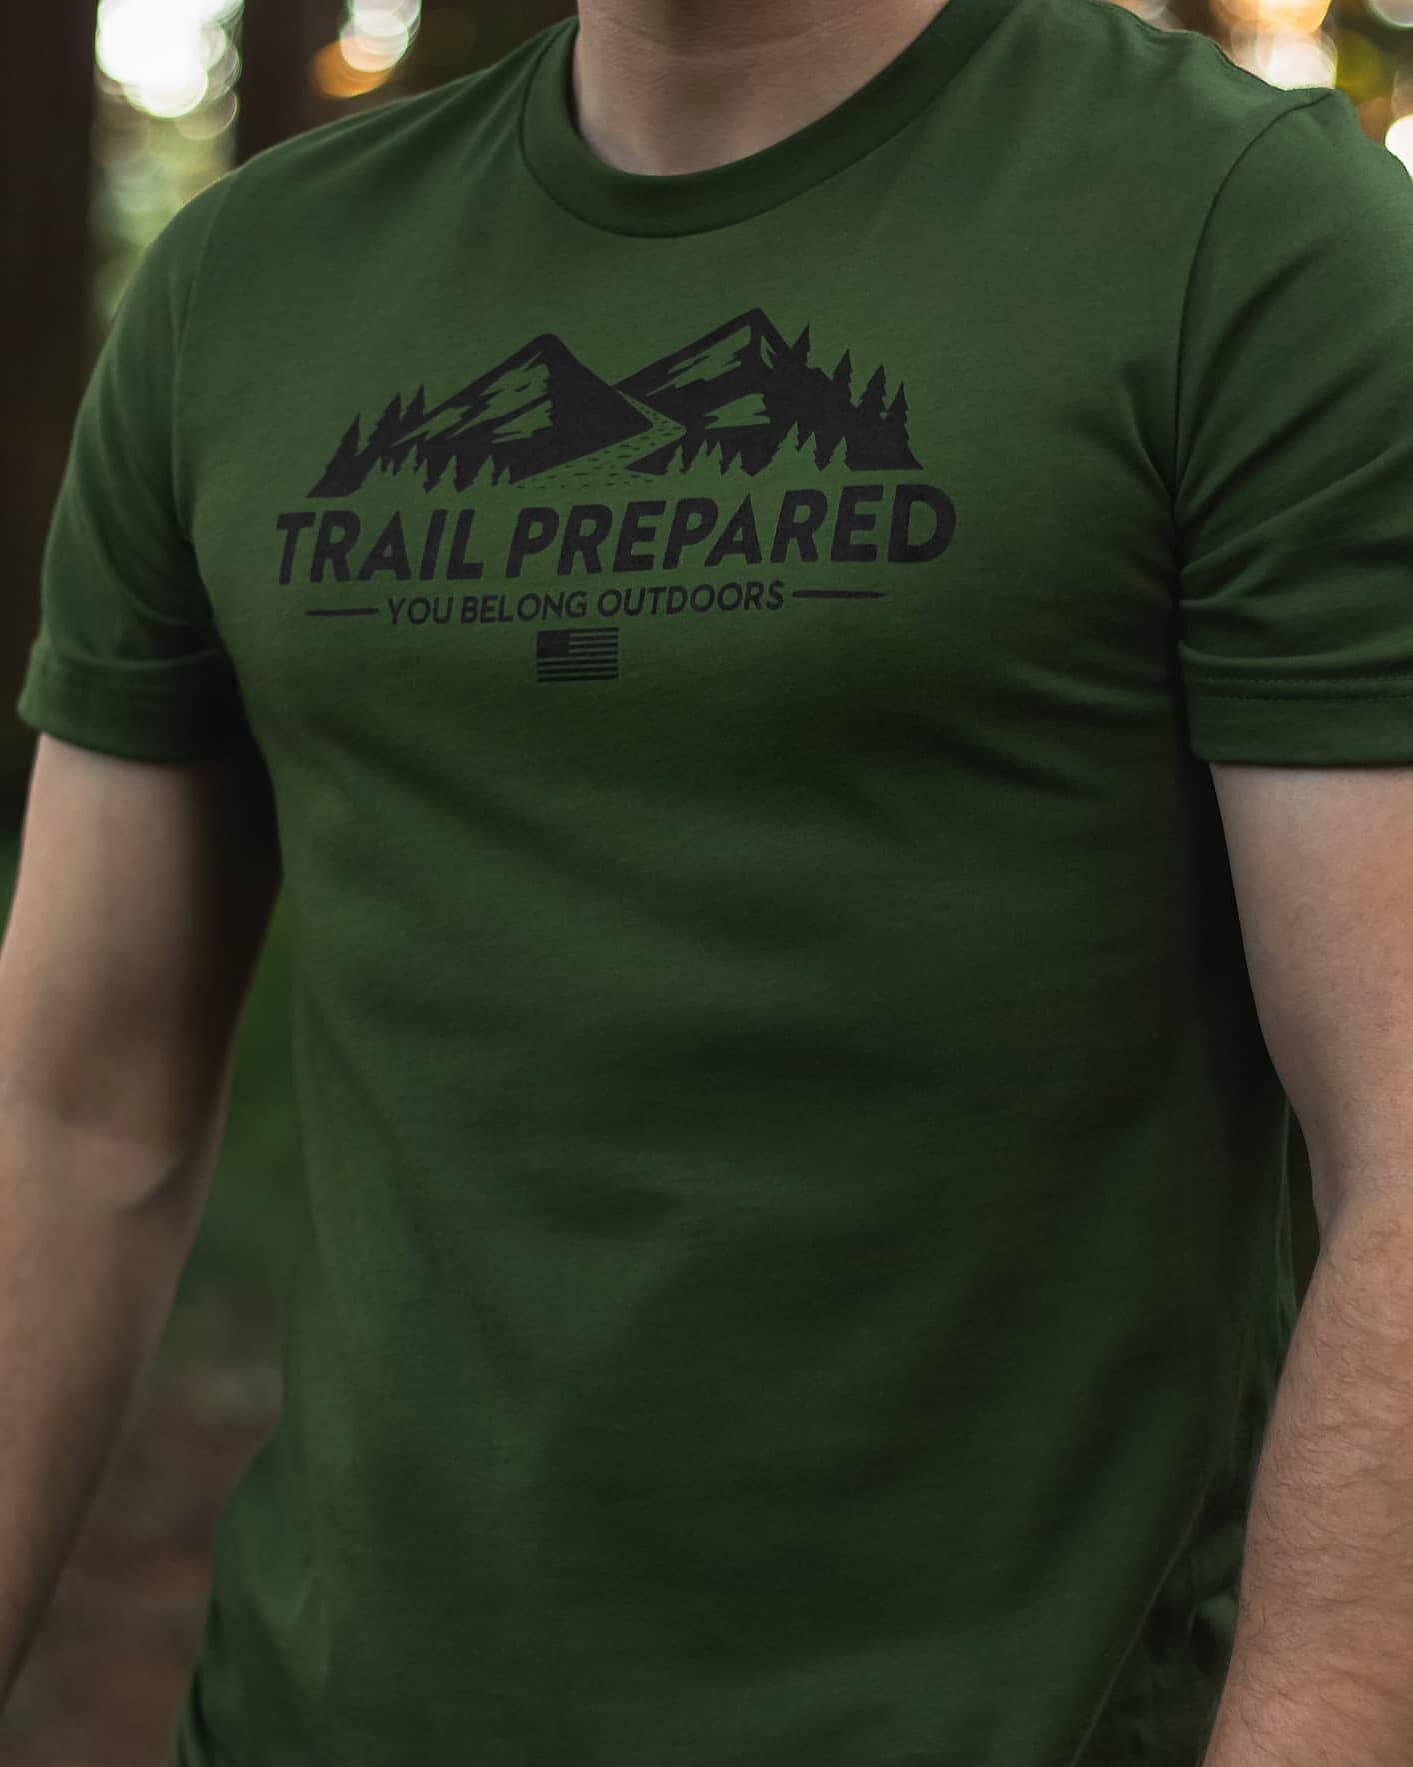 NEW t-shirts dropping today!👕
Get them in multiple colors &amp; sizes!
Check them out in the link in our profile.
-
-
-
-
-
#TrailPrepared #YouBelongOutdoors #TShirts #T-Shirts #Shirts #Cotton #CottonTShirts #Heather  #Camping #Hiking #Backpacking #